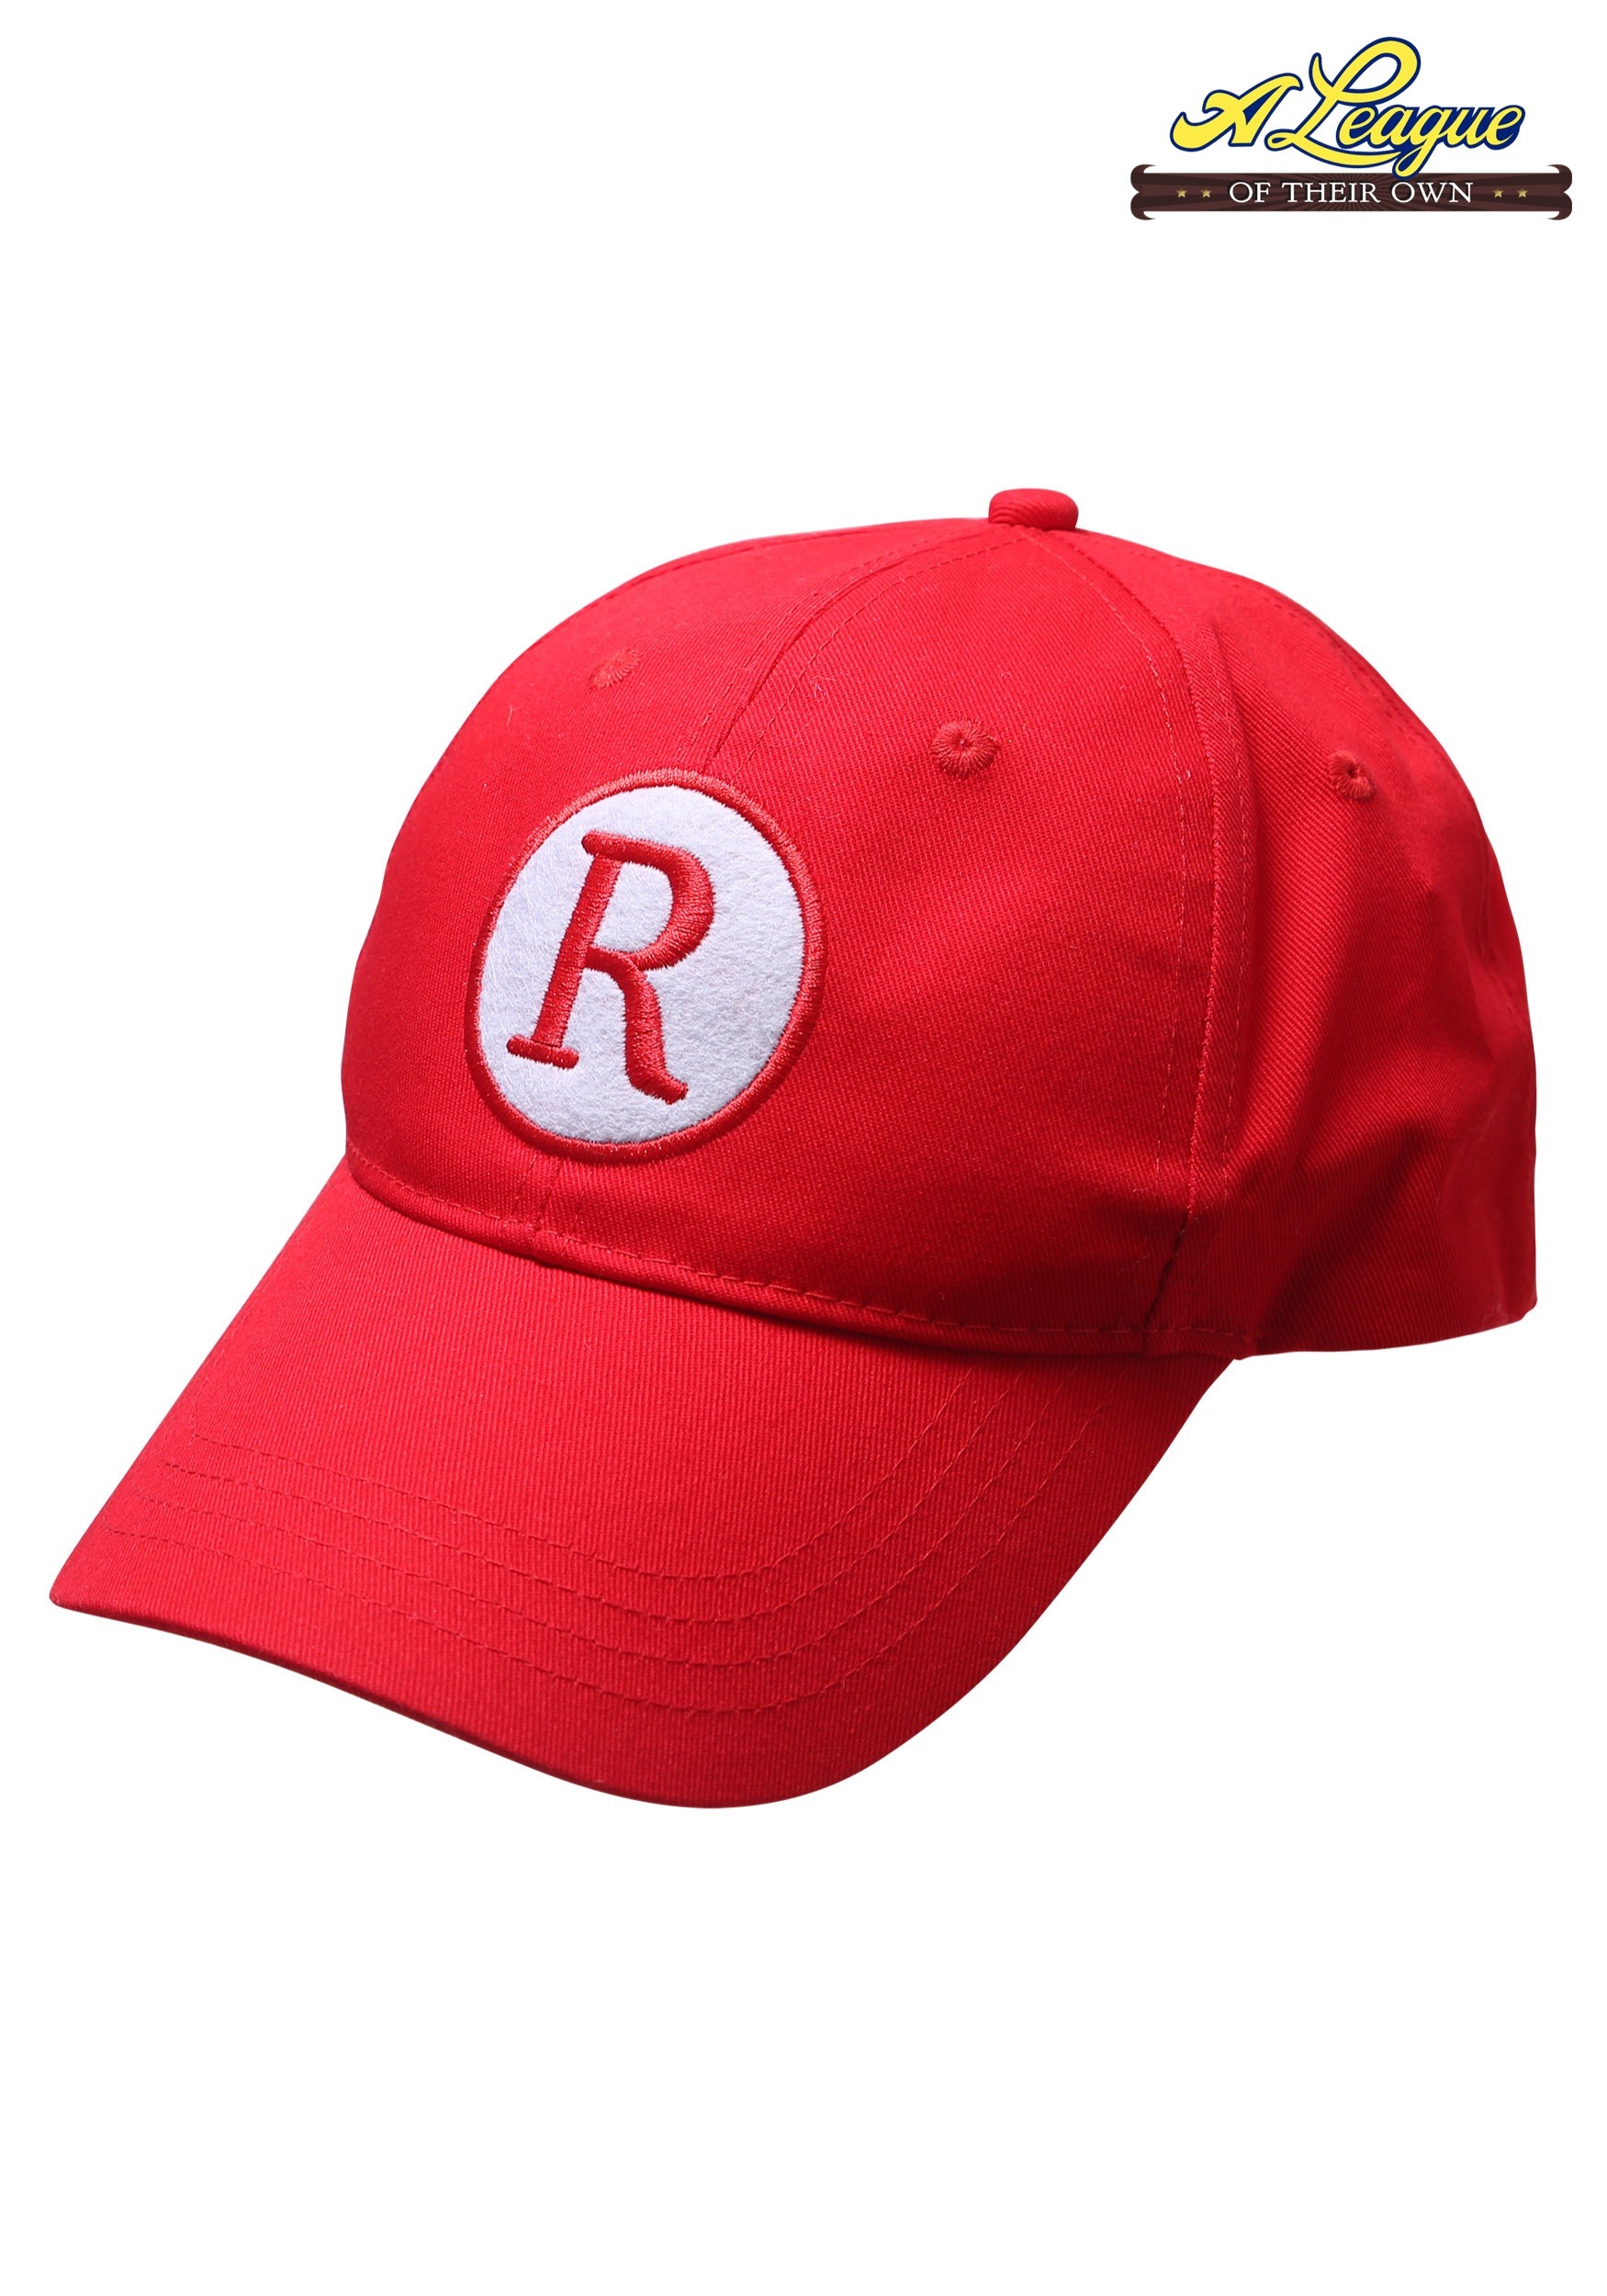 A League of Their Own Baseball Costume Hat